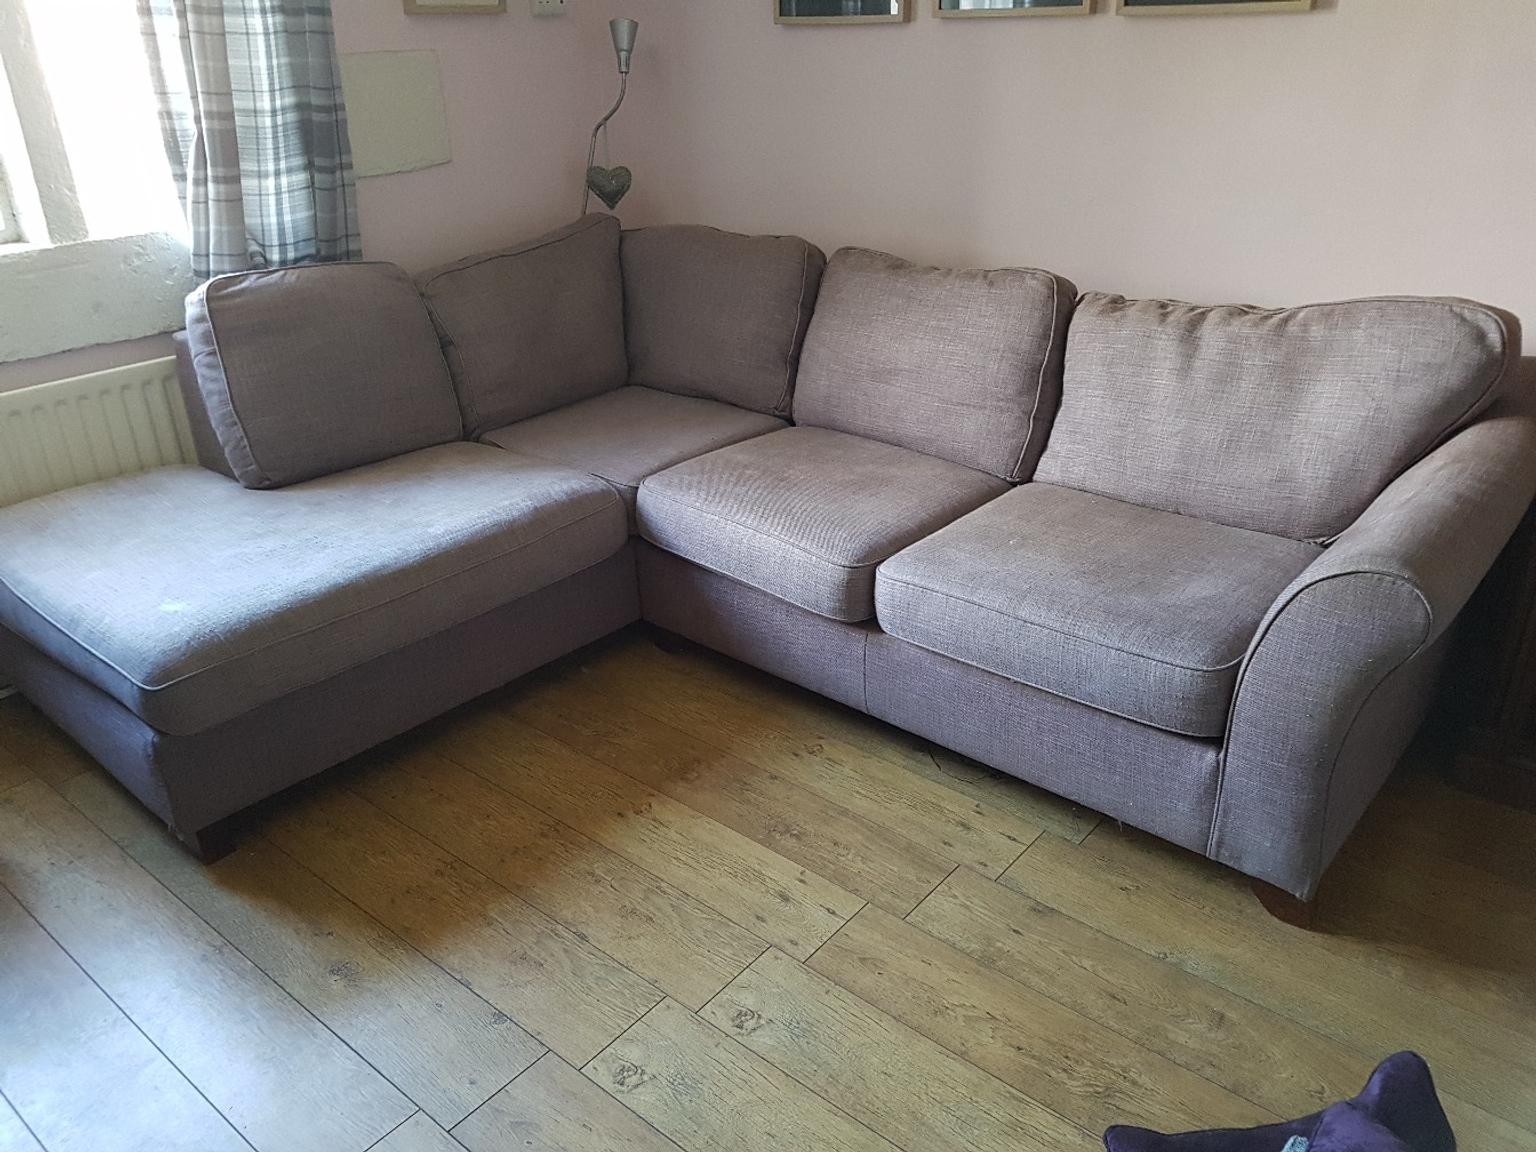 Marks And Spencers Abbey Sofa In Harthill For 200 00 For Sale Shpock